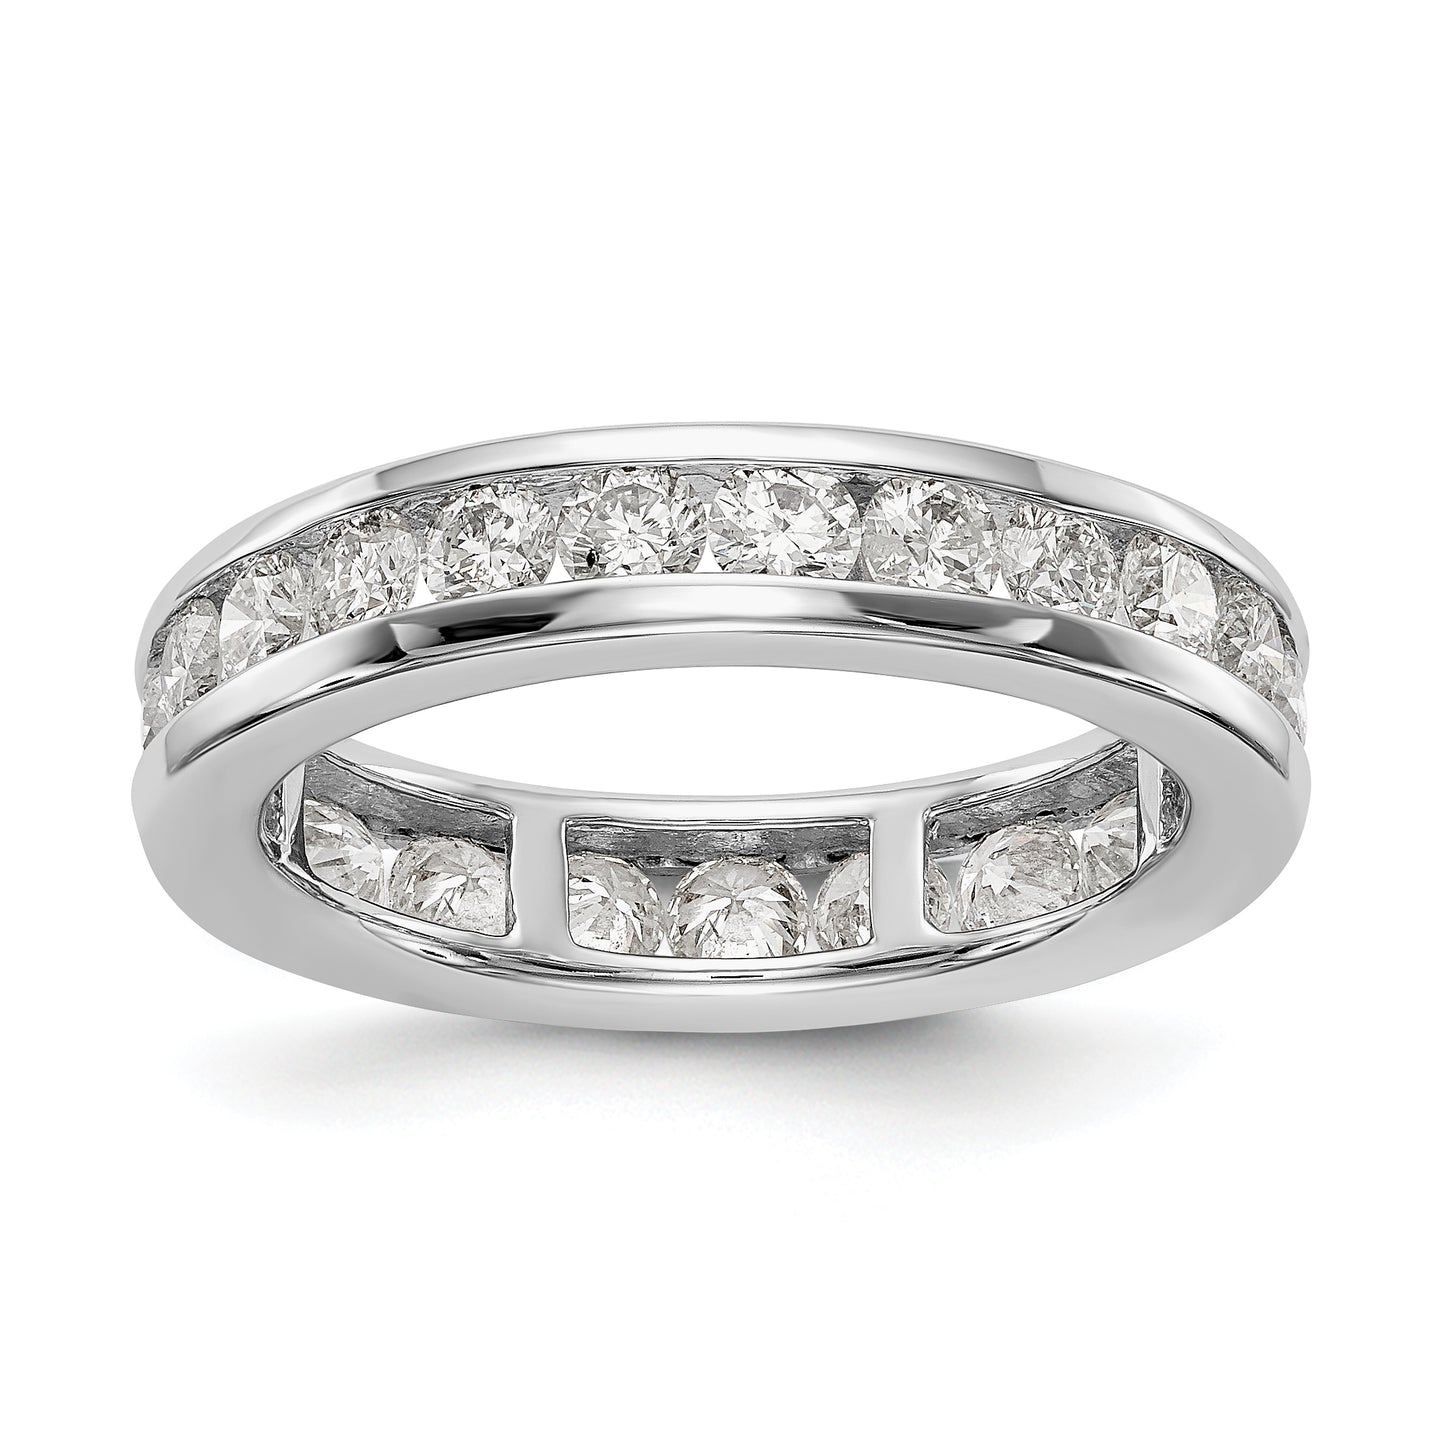 2 Ct. Natural Diamond Womens Eternity Wedding Band Ring in 14k White Gold